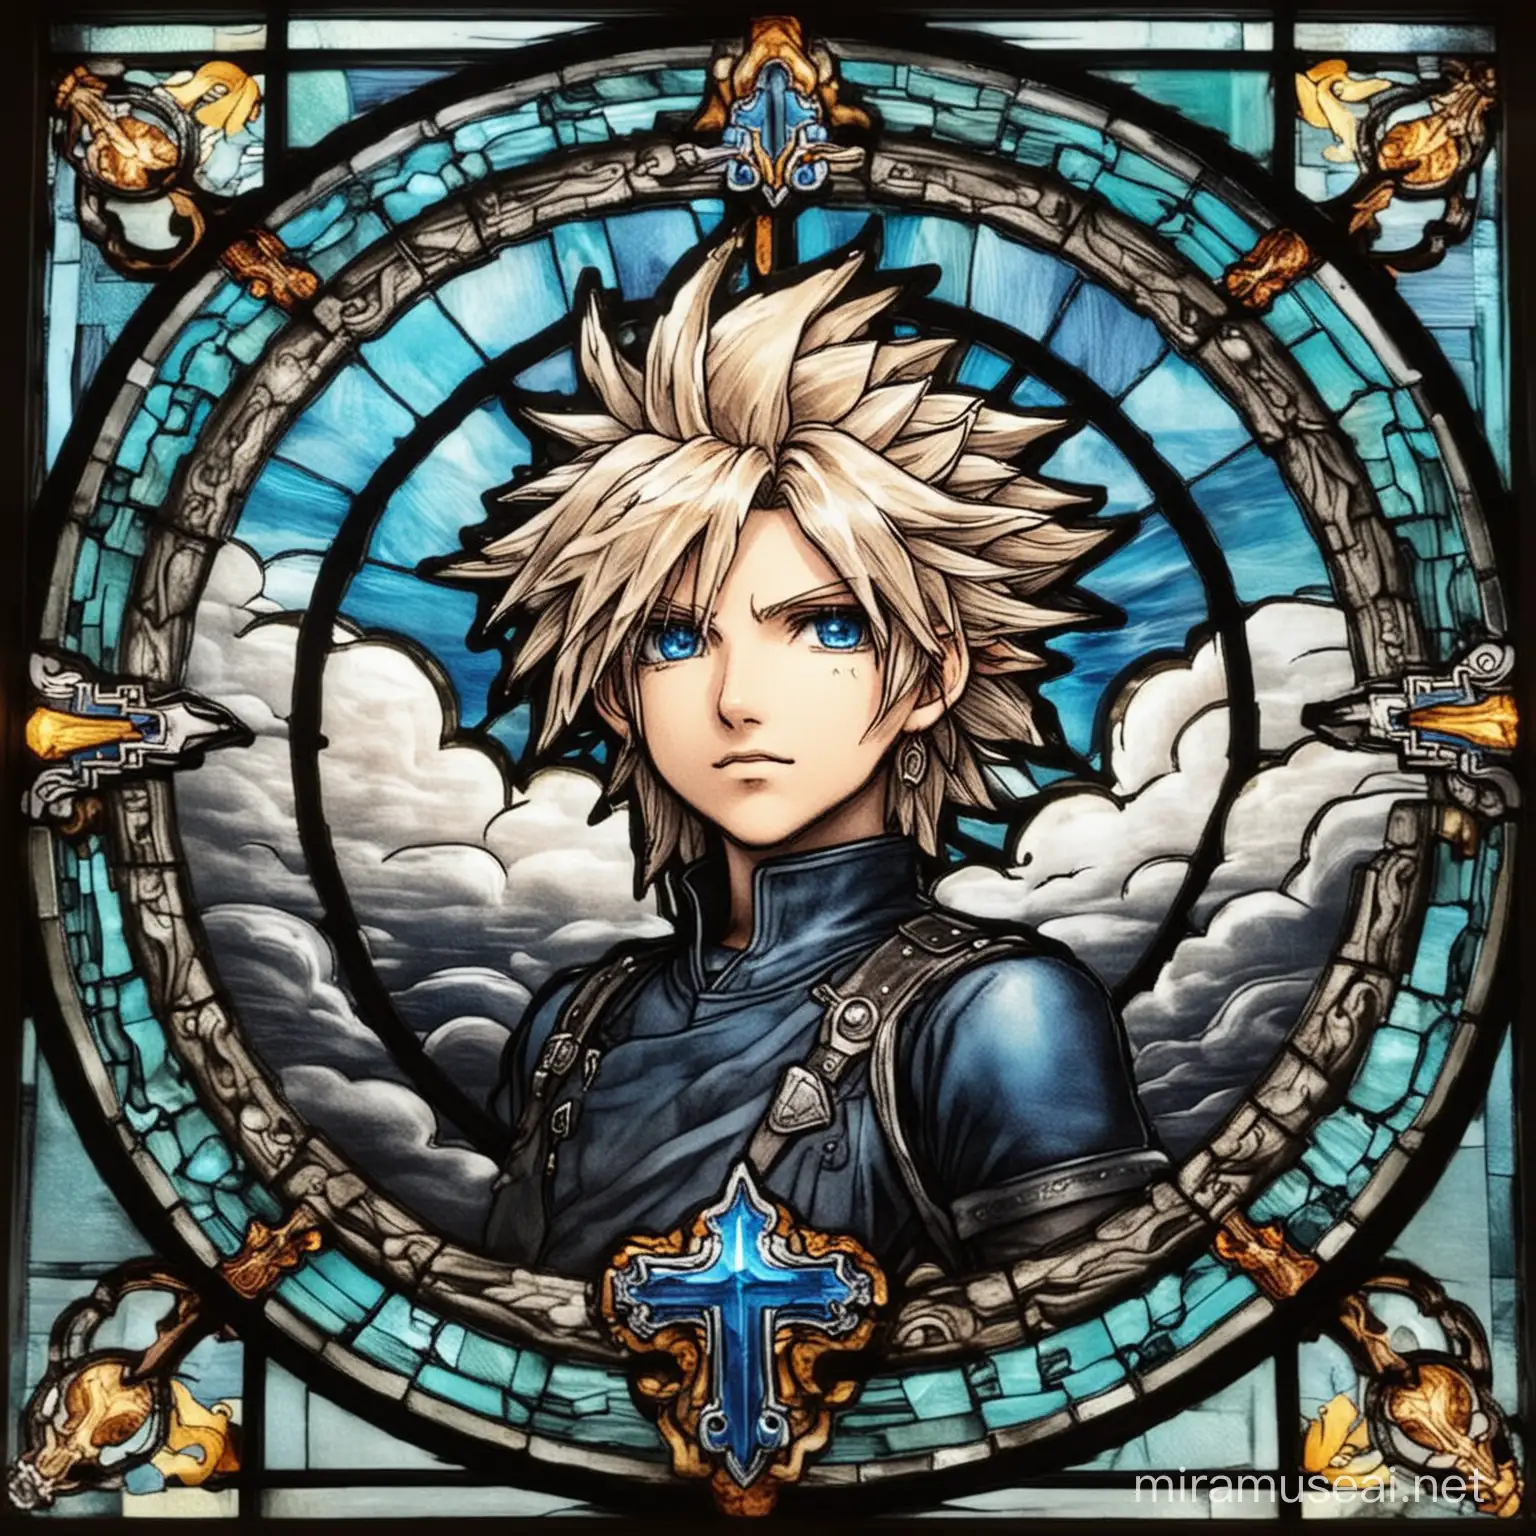 Ethereal Cloud from Final Fantasy Captured in Stained Glass Splendor